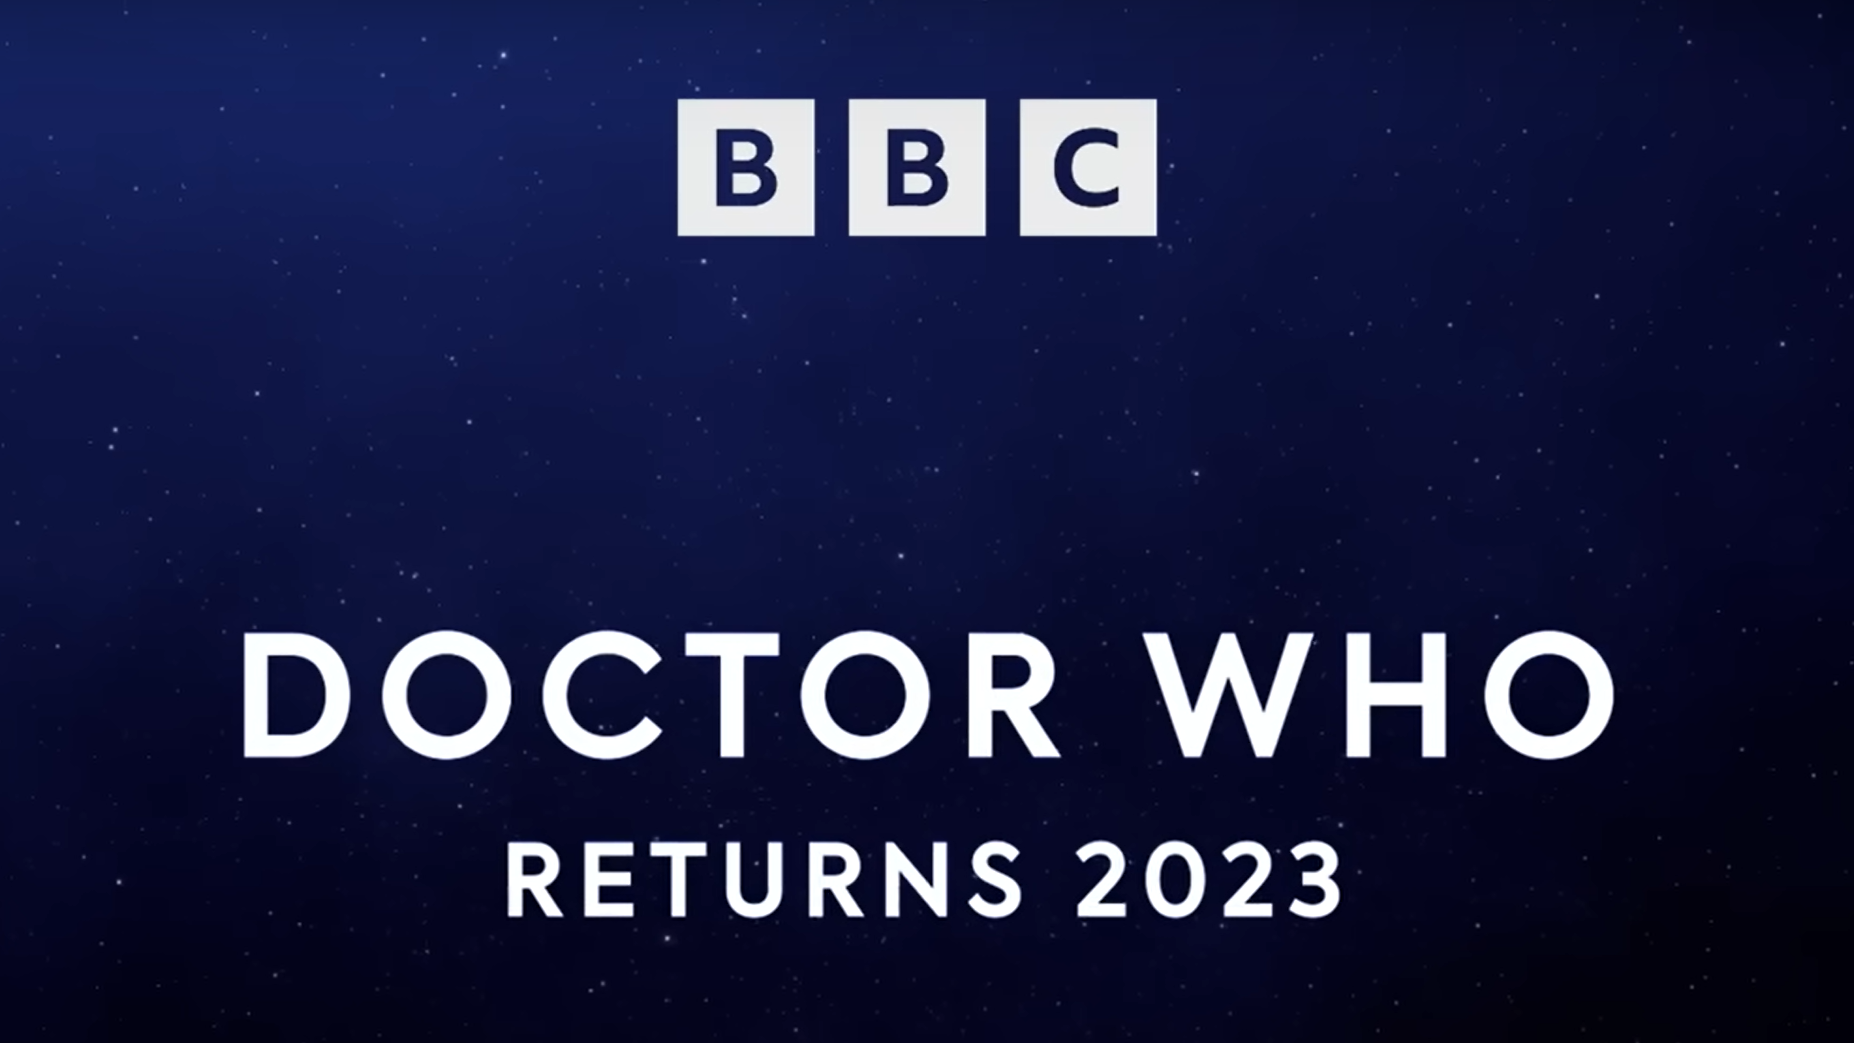 BBC Releases Trailer For Doctor Who Th Anniversary Specials Mxdwn Television